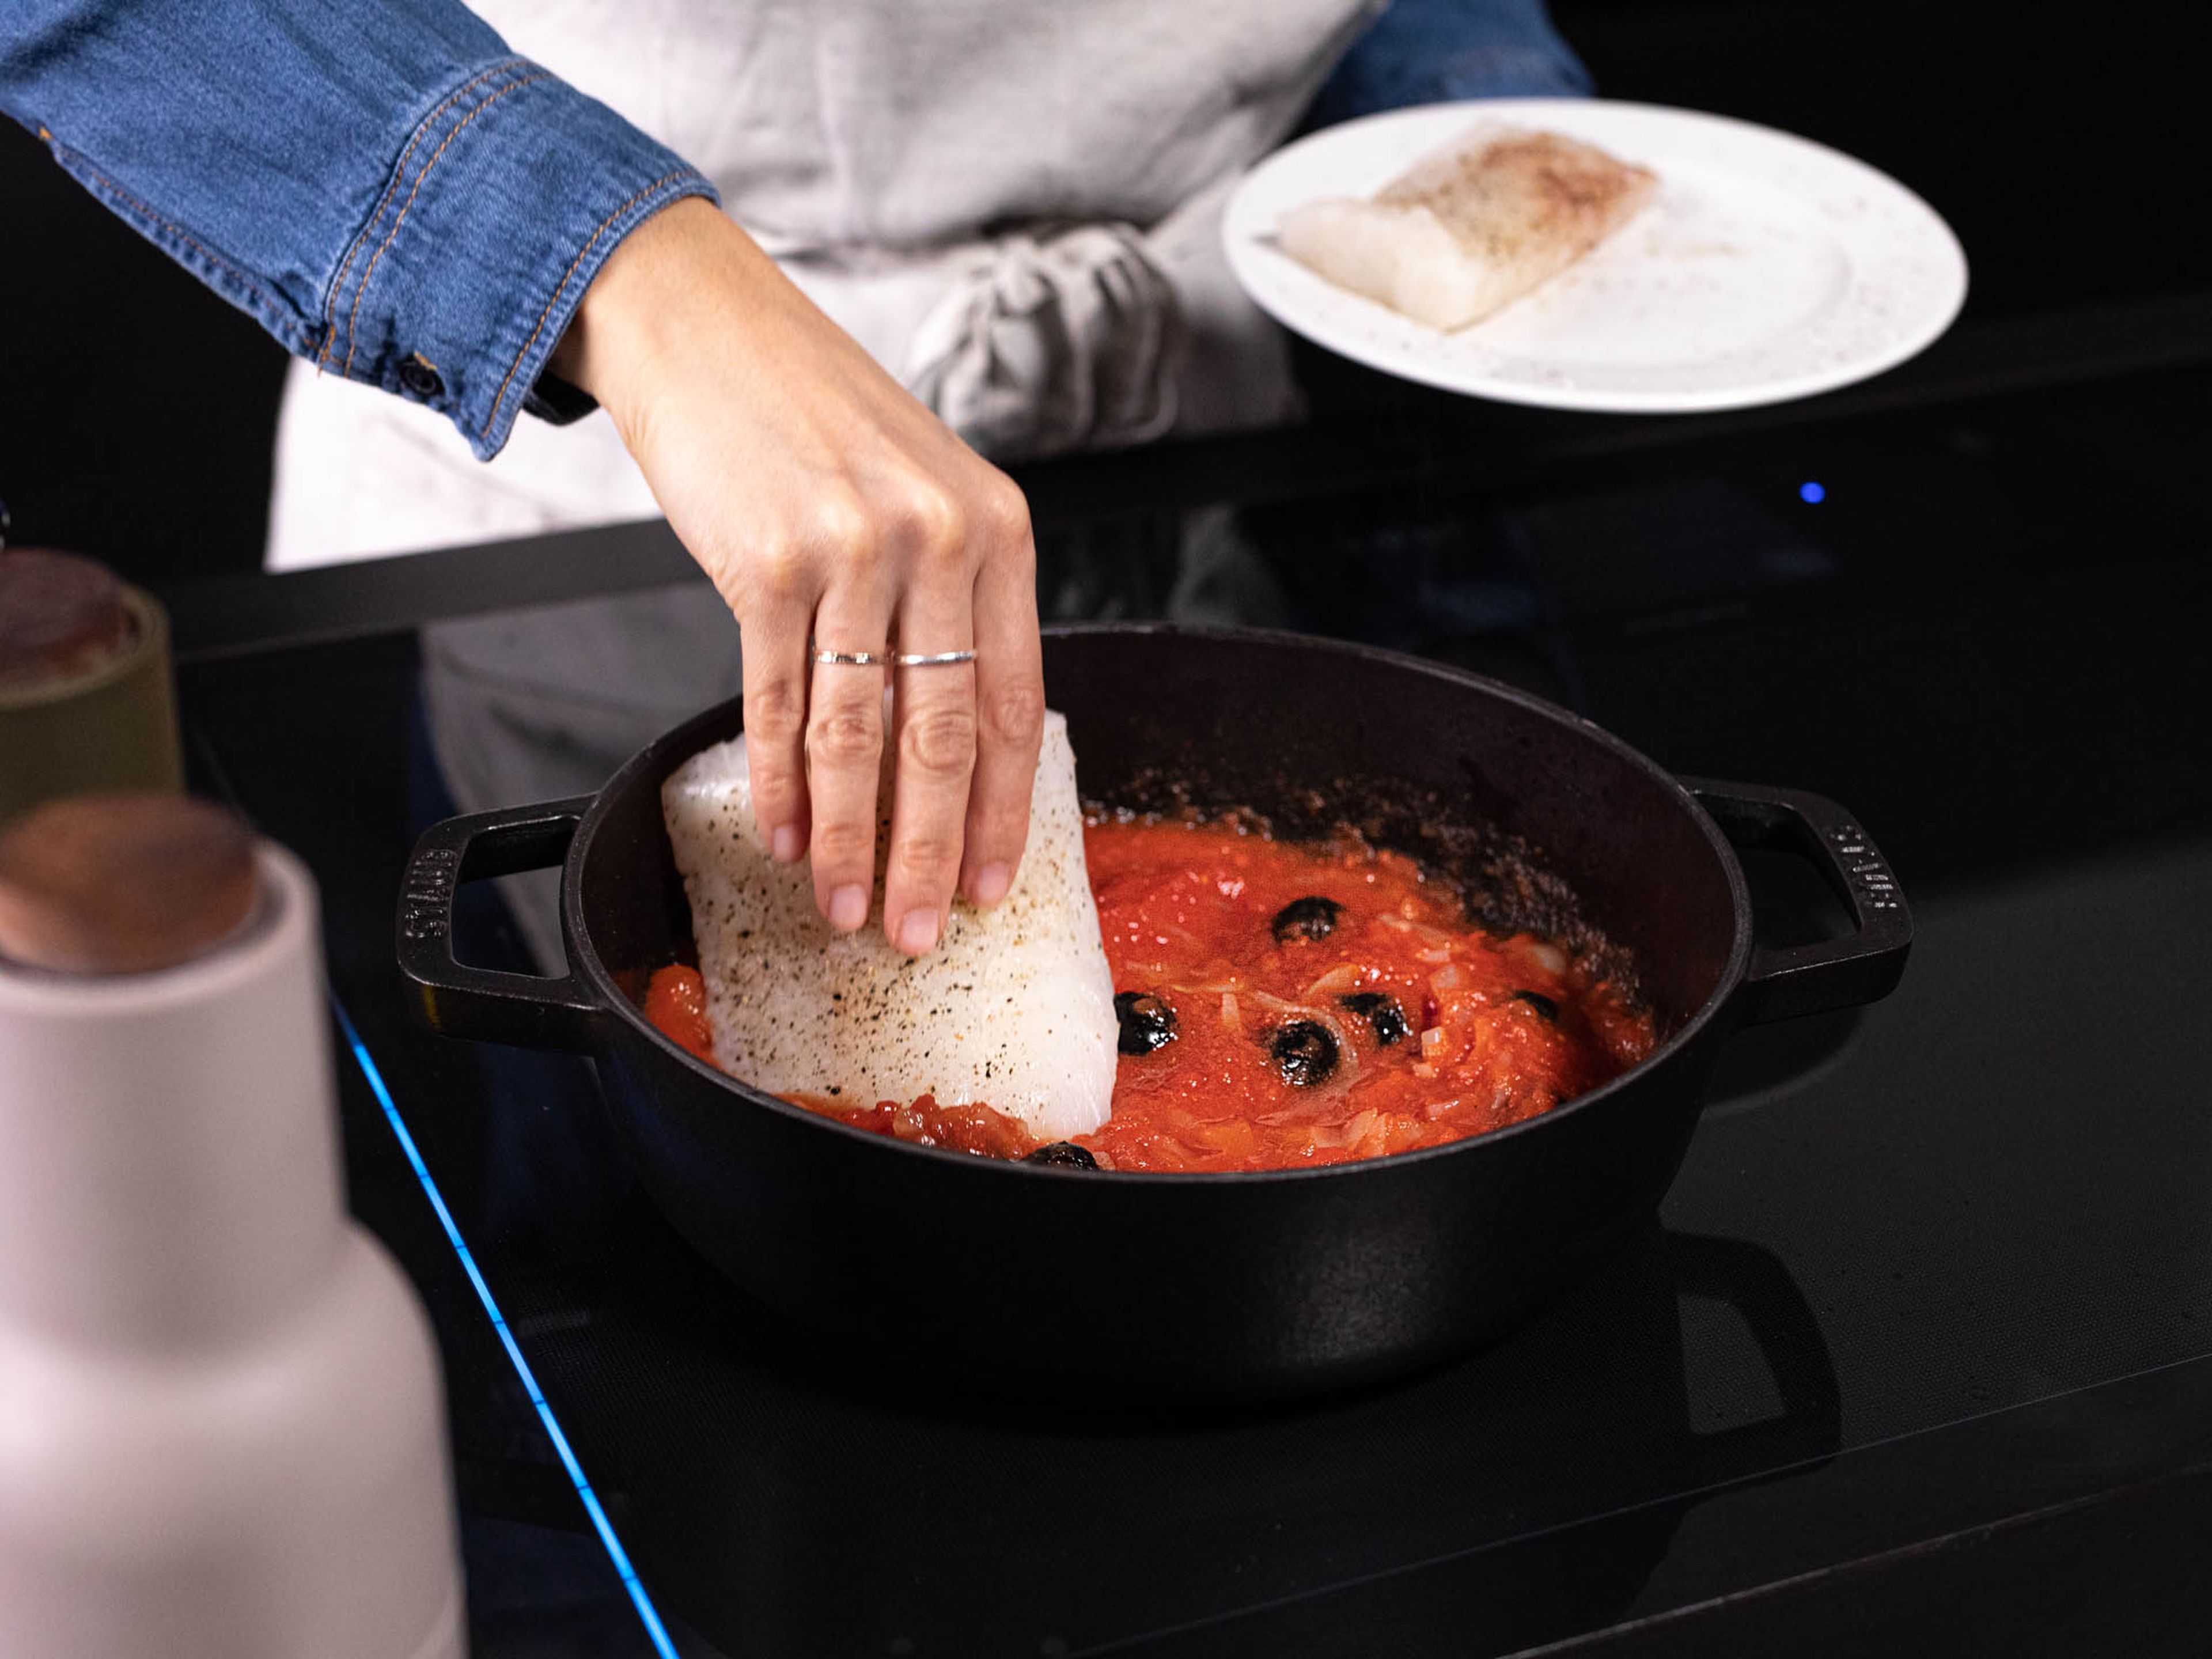 Transfer fish to the pan and cover each fillet with some of the tomato sauce. Lower heat to medium-low, partially cover the pan with a lid, and let simmer for approx. 8 min., or until fish is cooked through. Once the filet flakes with a gentle push, the fish is cooked. Serve immediately topped with fresh basil, chili flakes, and toasted bread. Enjoy!